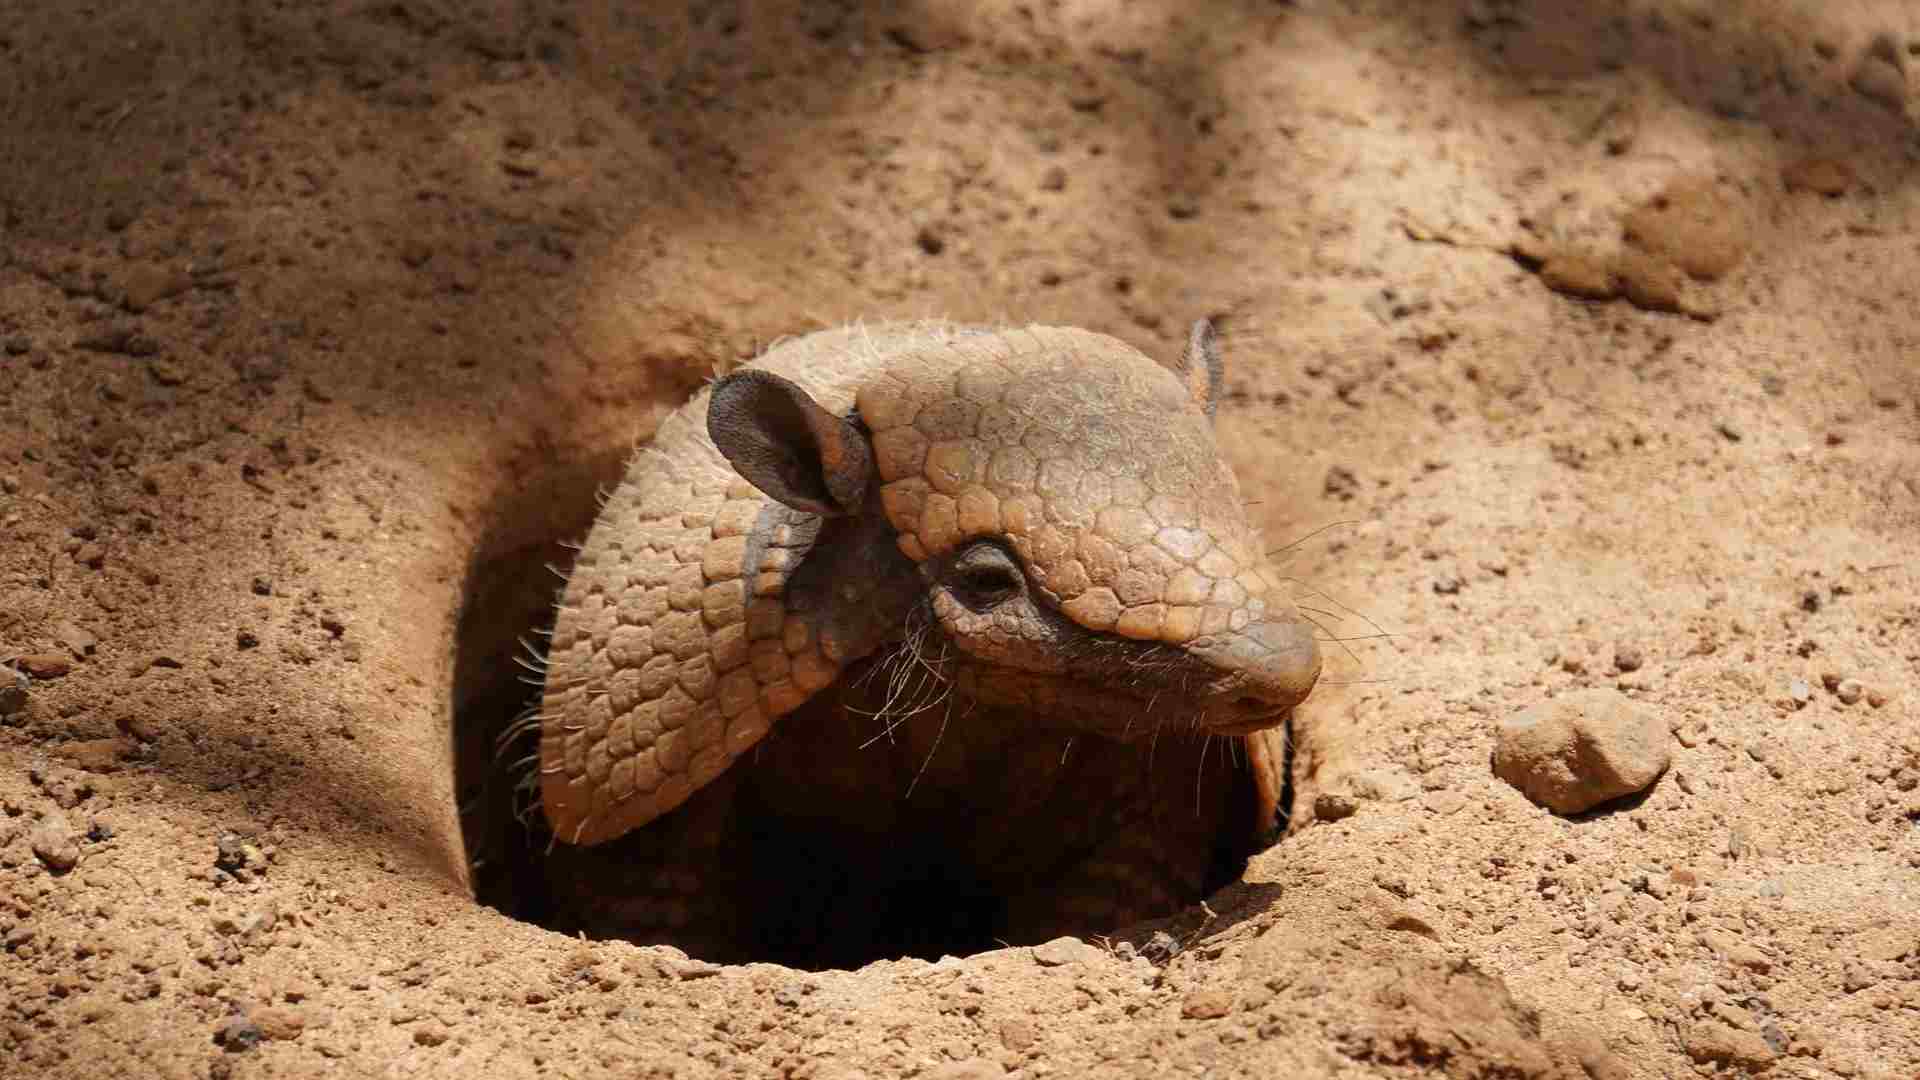 Armadillos are one of the species that have armor on them.